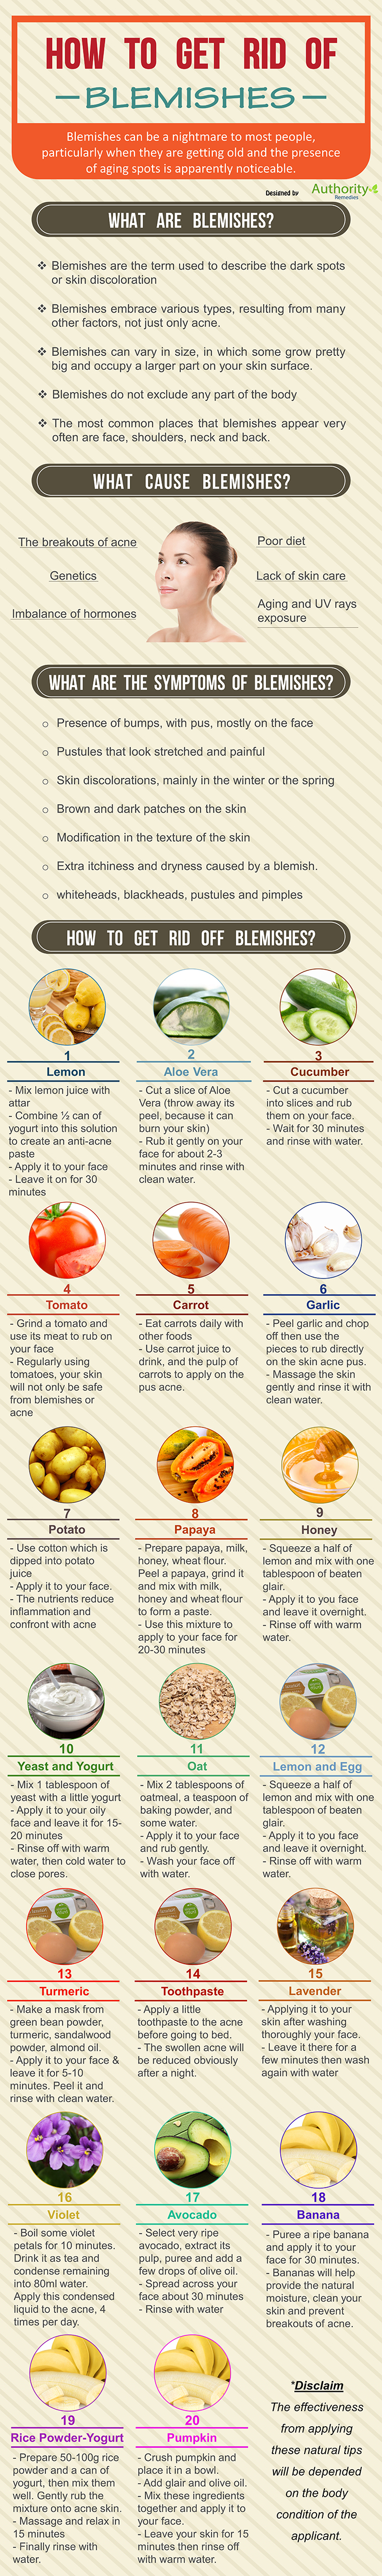 Remedies for Blemishes infographic